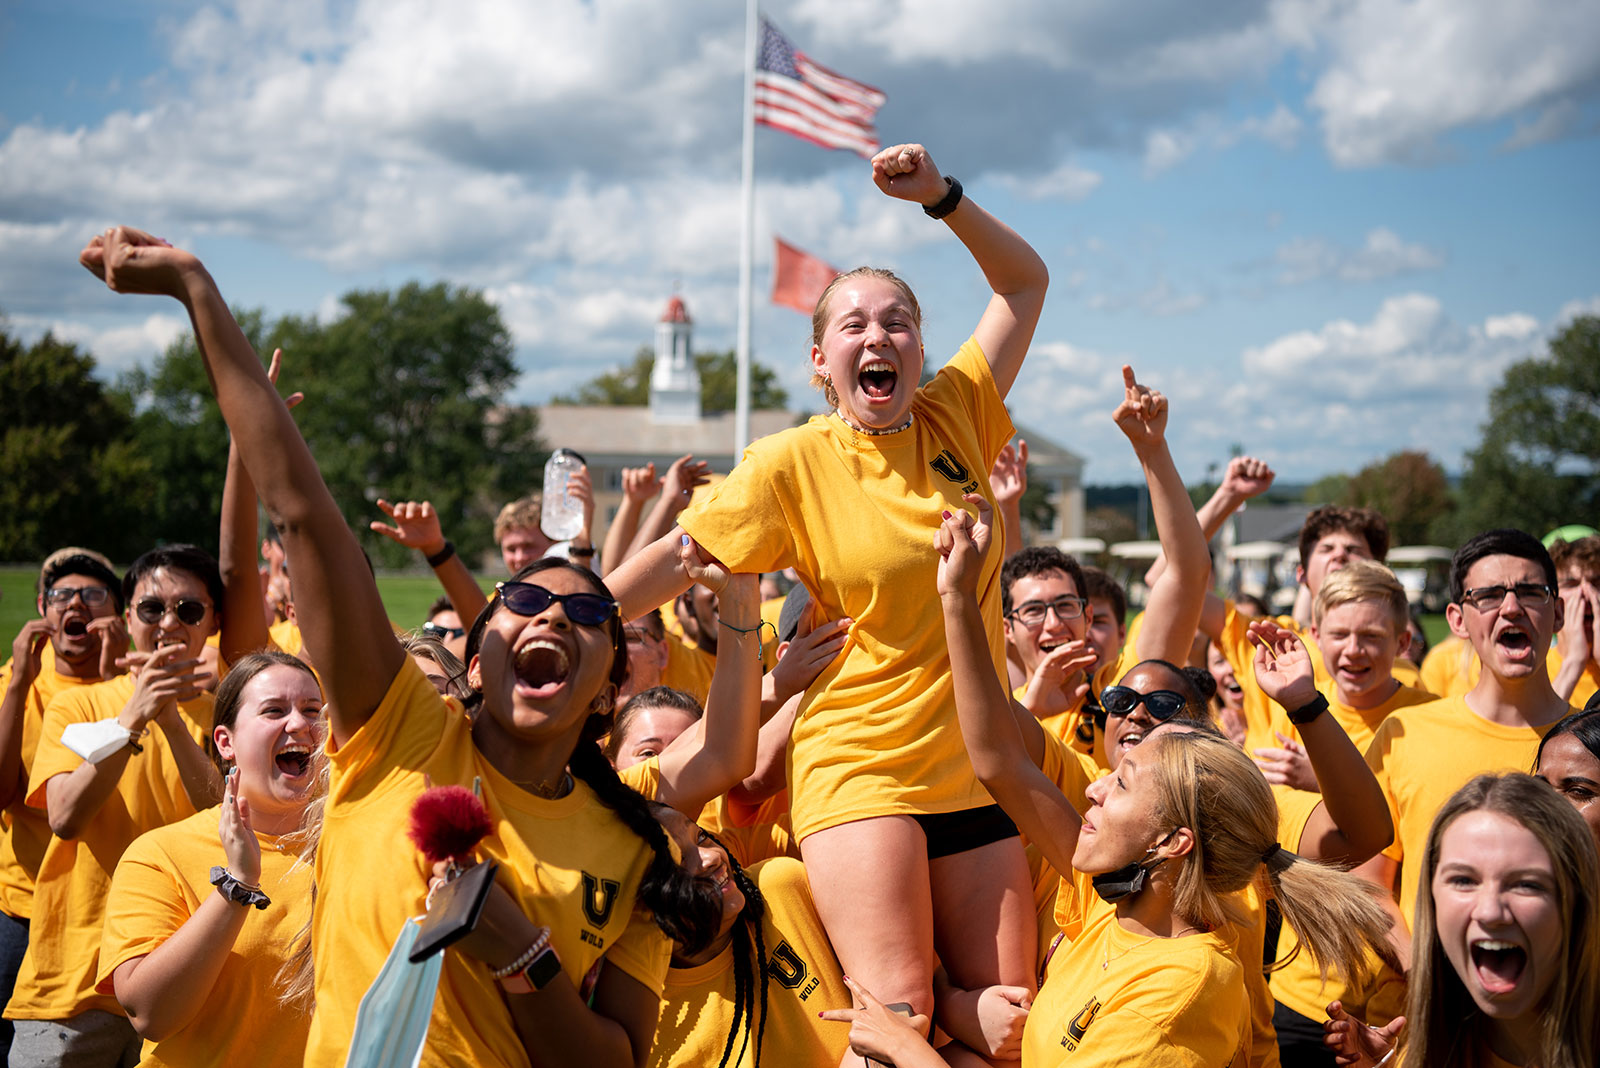 Students on the yellow team enthusiastically leap up during the Minerva Olympics.